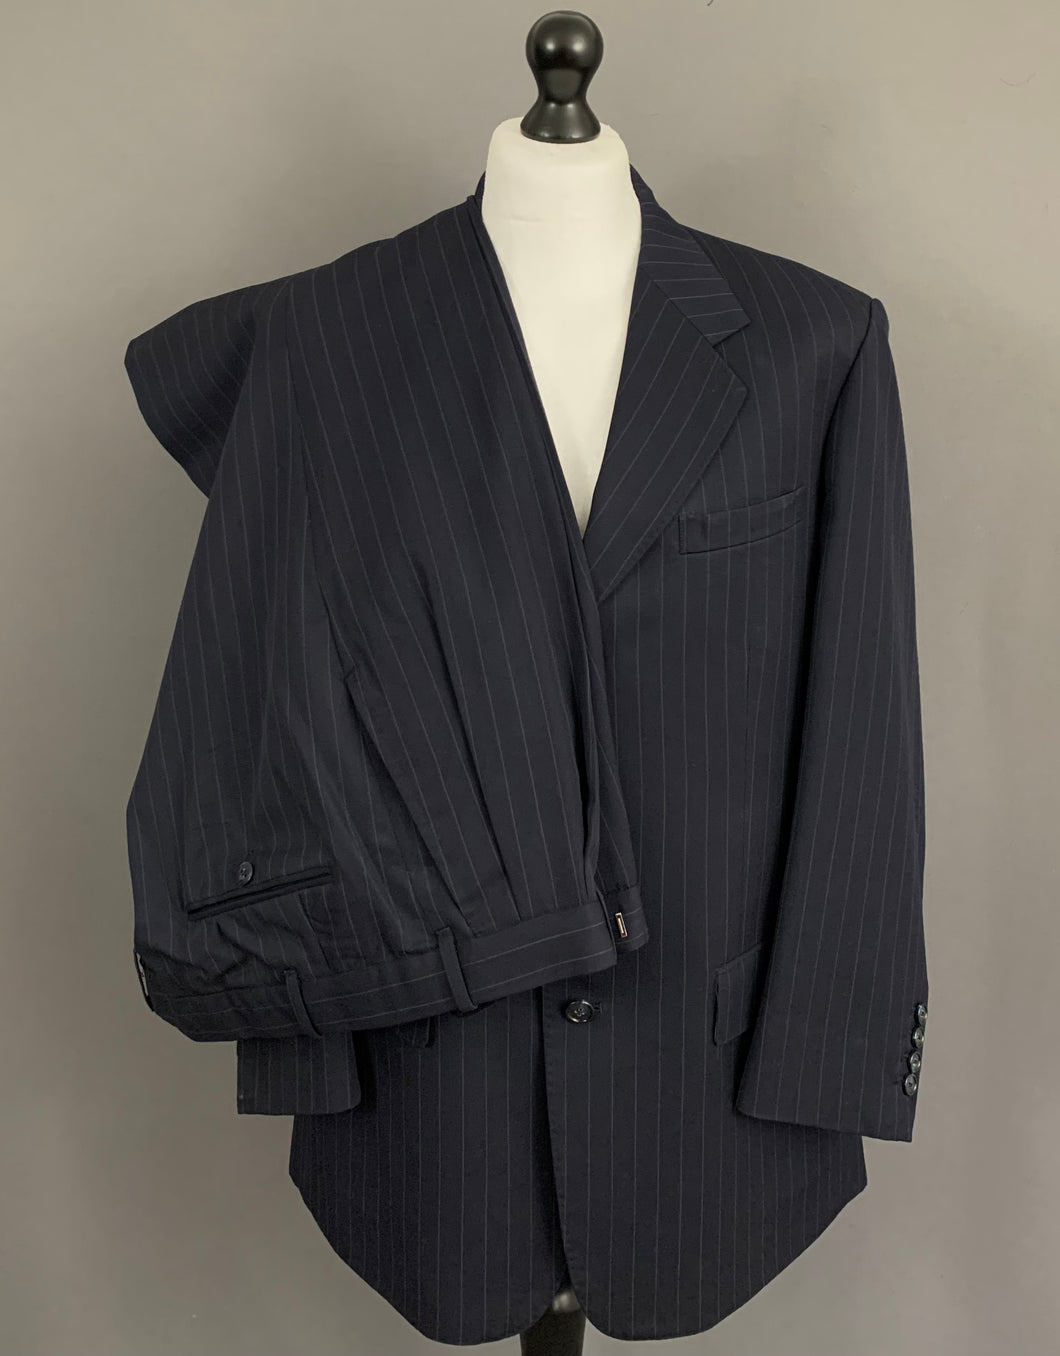 GIANNI VERSACE SUIT - CUSTOM MADE - Size IT 54 - 44